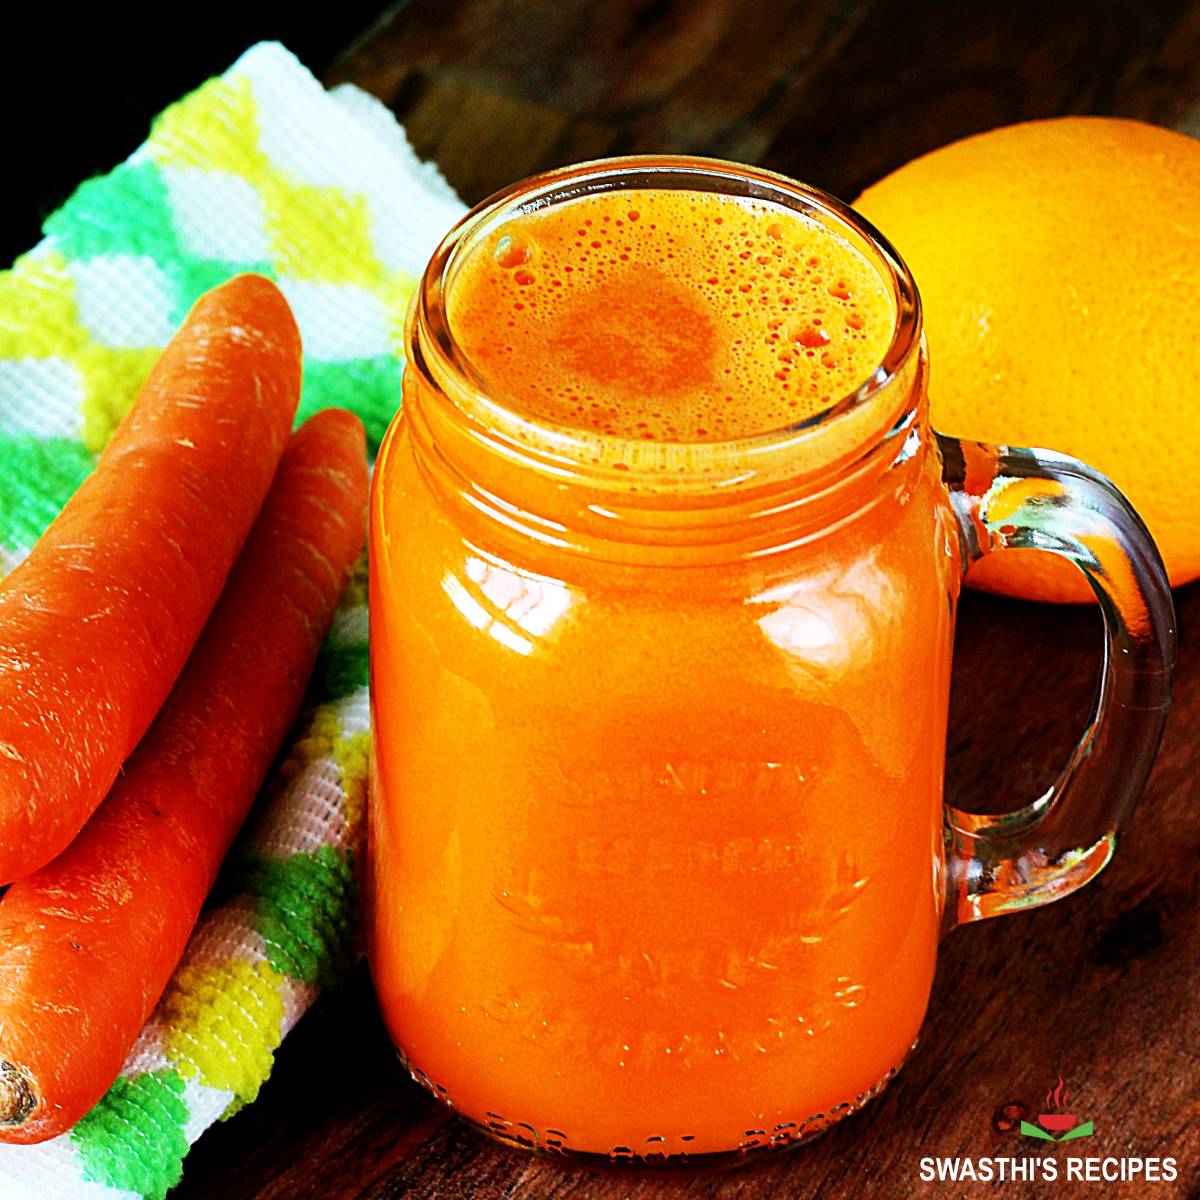 storage method - How to prevent carrot juice from turning brown? - Seasoned  Advice